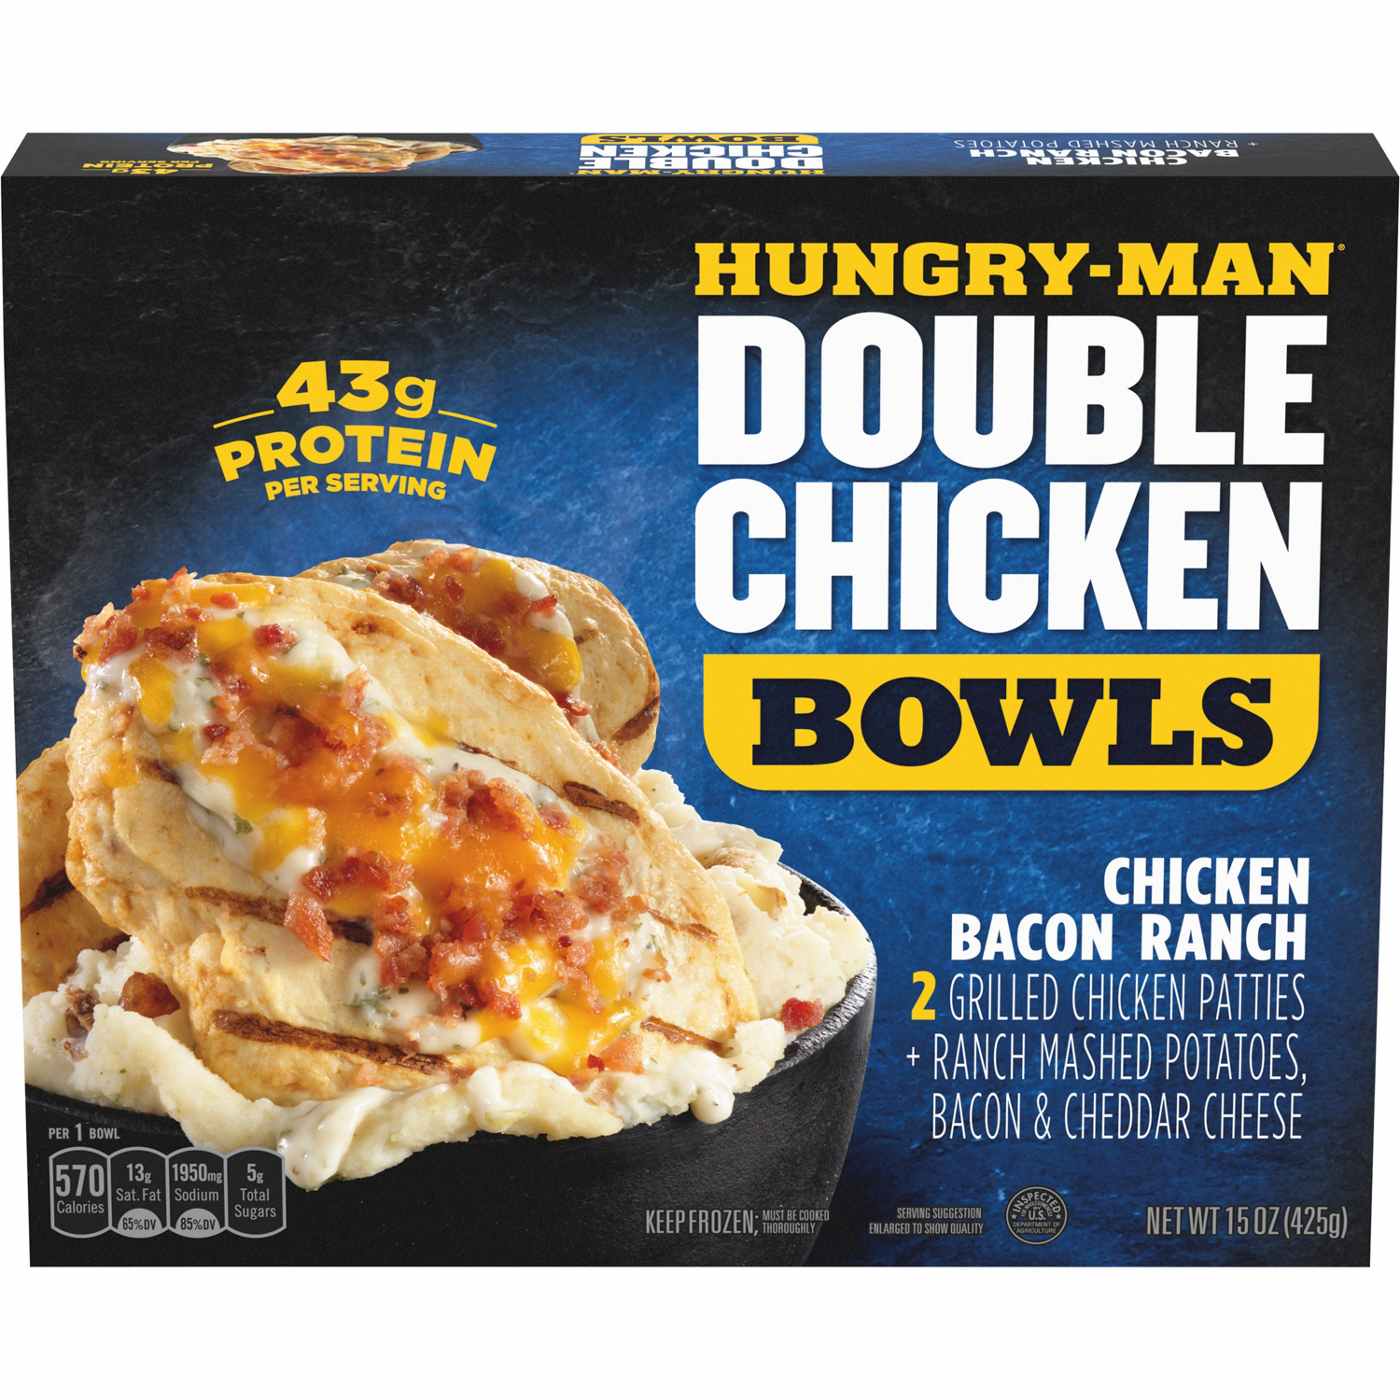 Hungry-Man Double Chicken Bowls Chicken Bacon Ranch Patties Frozen Meal; image 1 of 4